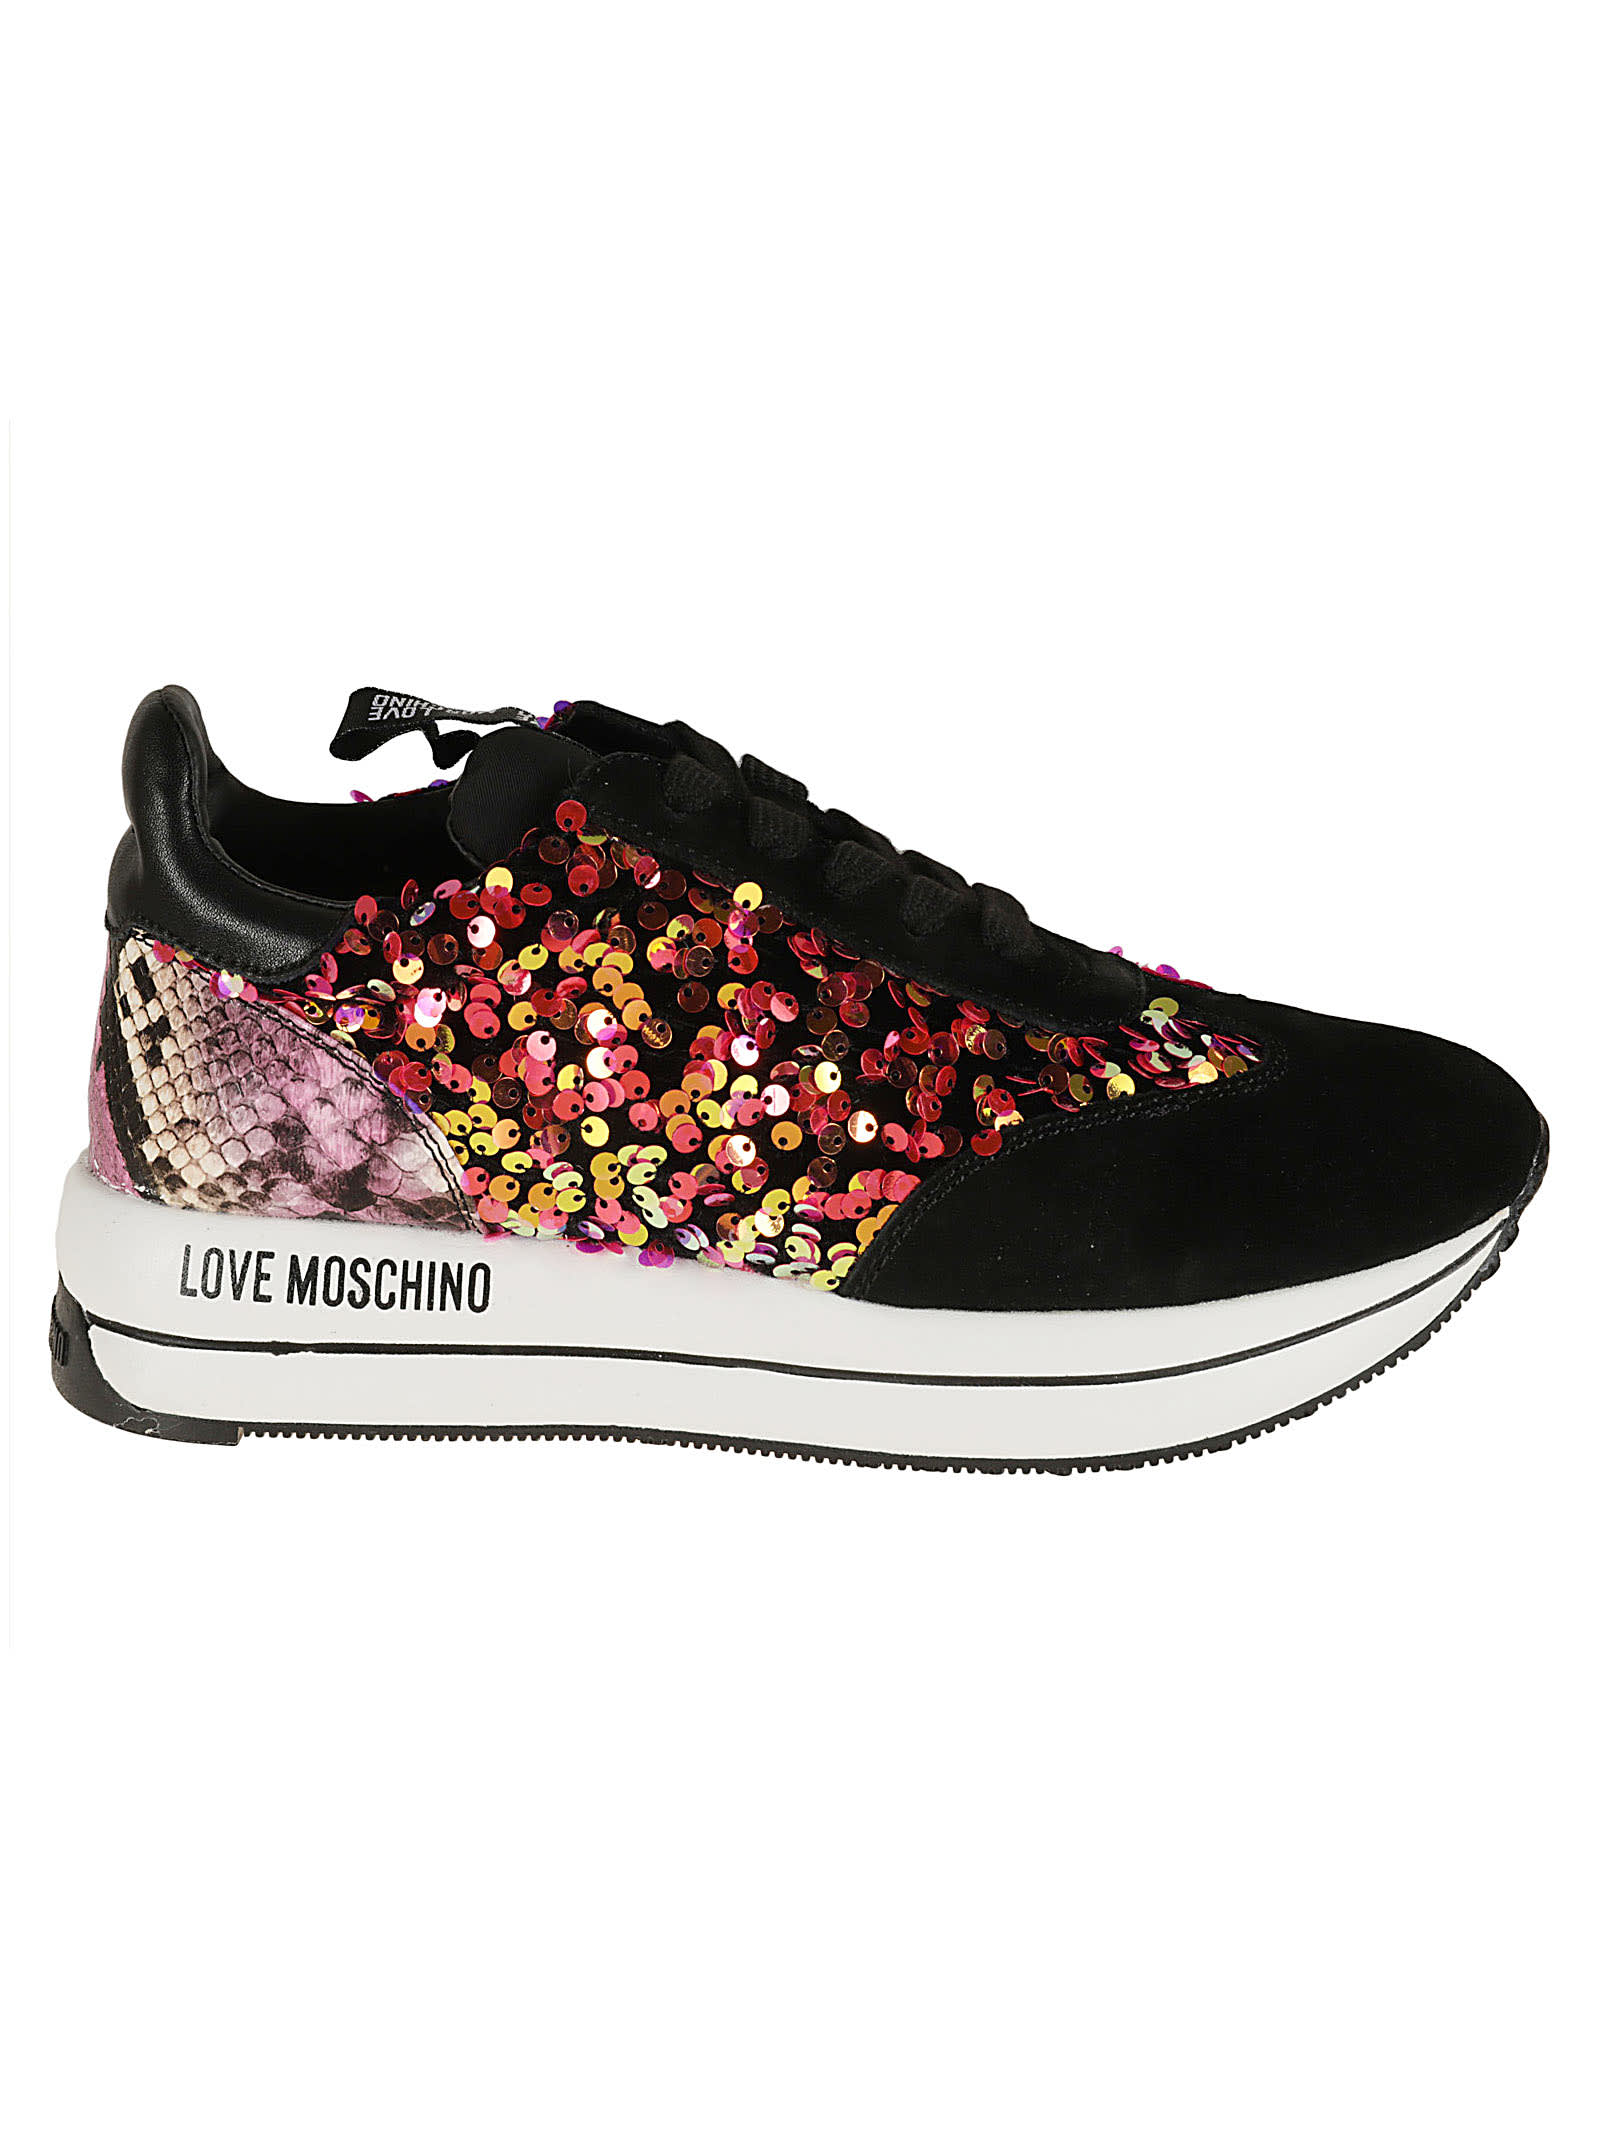 Love Moschino Bead Embellished Logo Sneakers